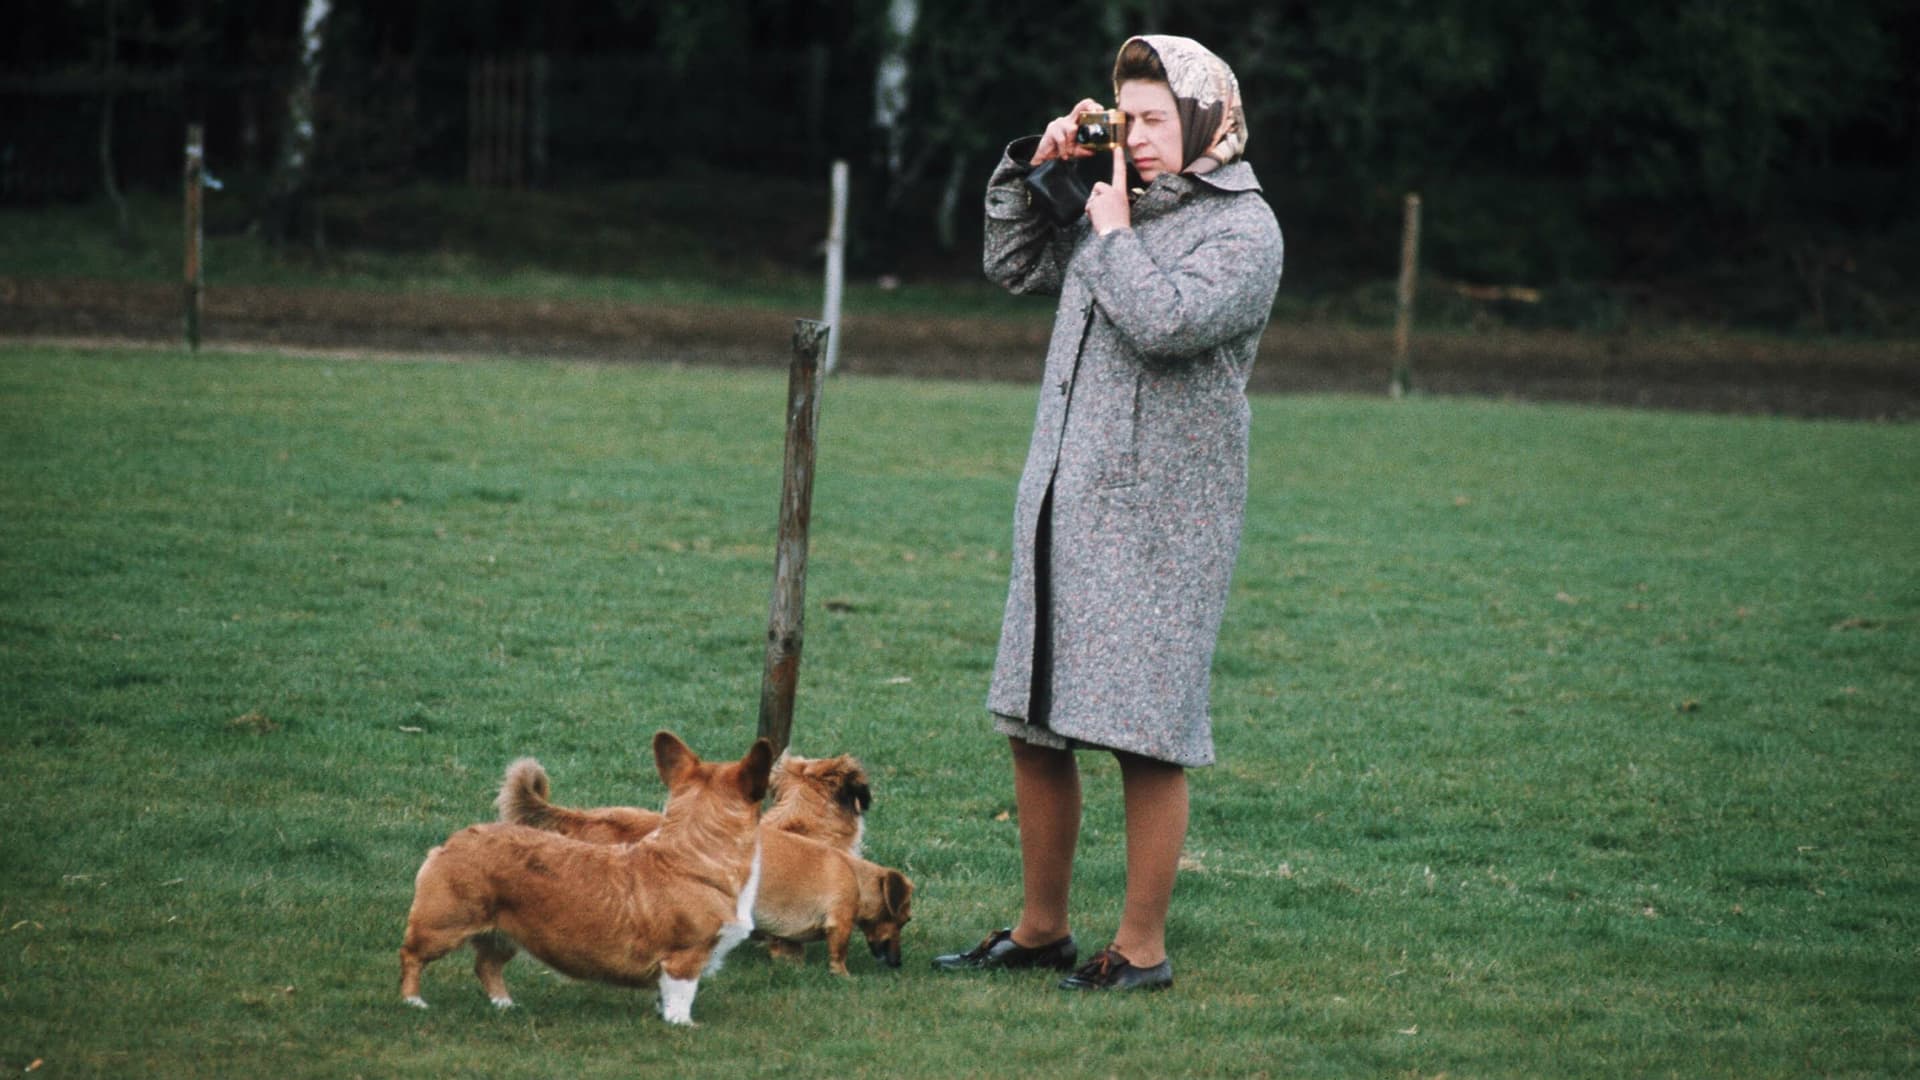 Queen Elizabeth takes a photograph while with her corgis at Windsor Park in 1960 in Windsor, England.